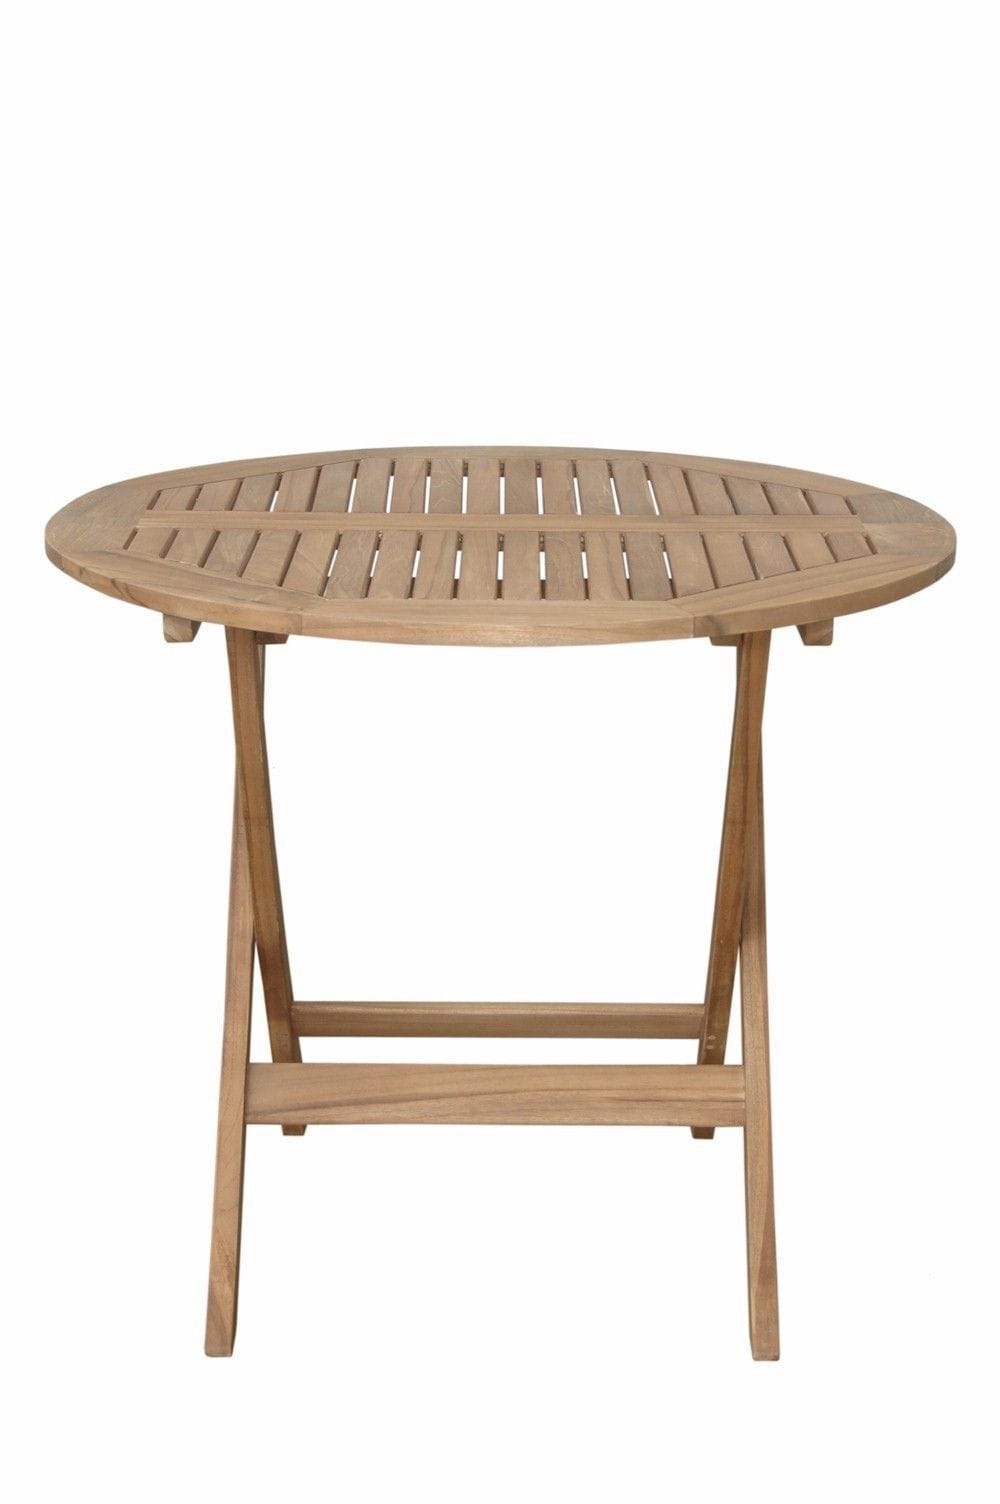 Anderson Teak Outdoor Table Anderson Teak Chester 32" Round Folding Picnic Table